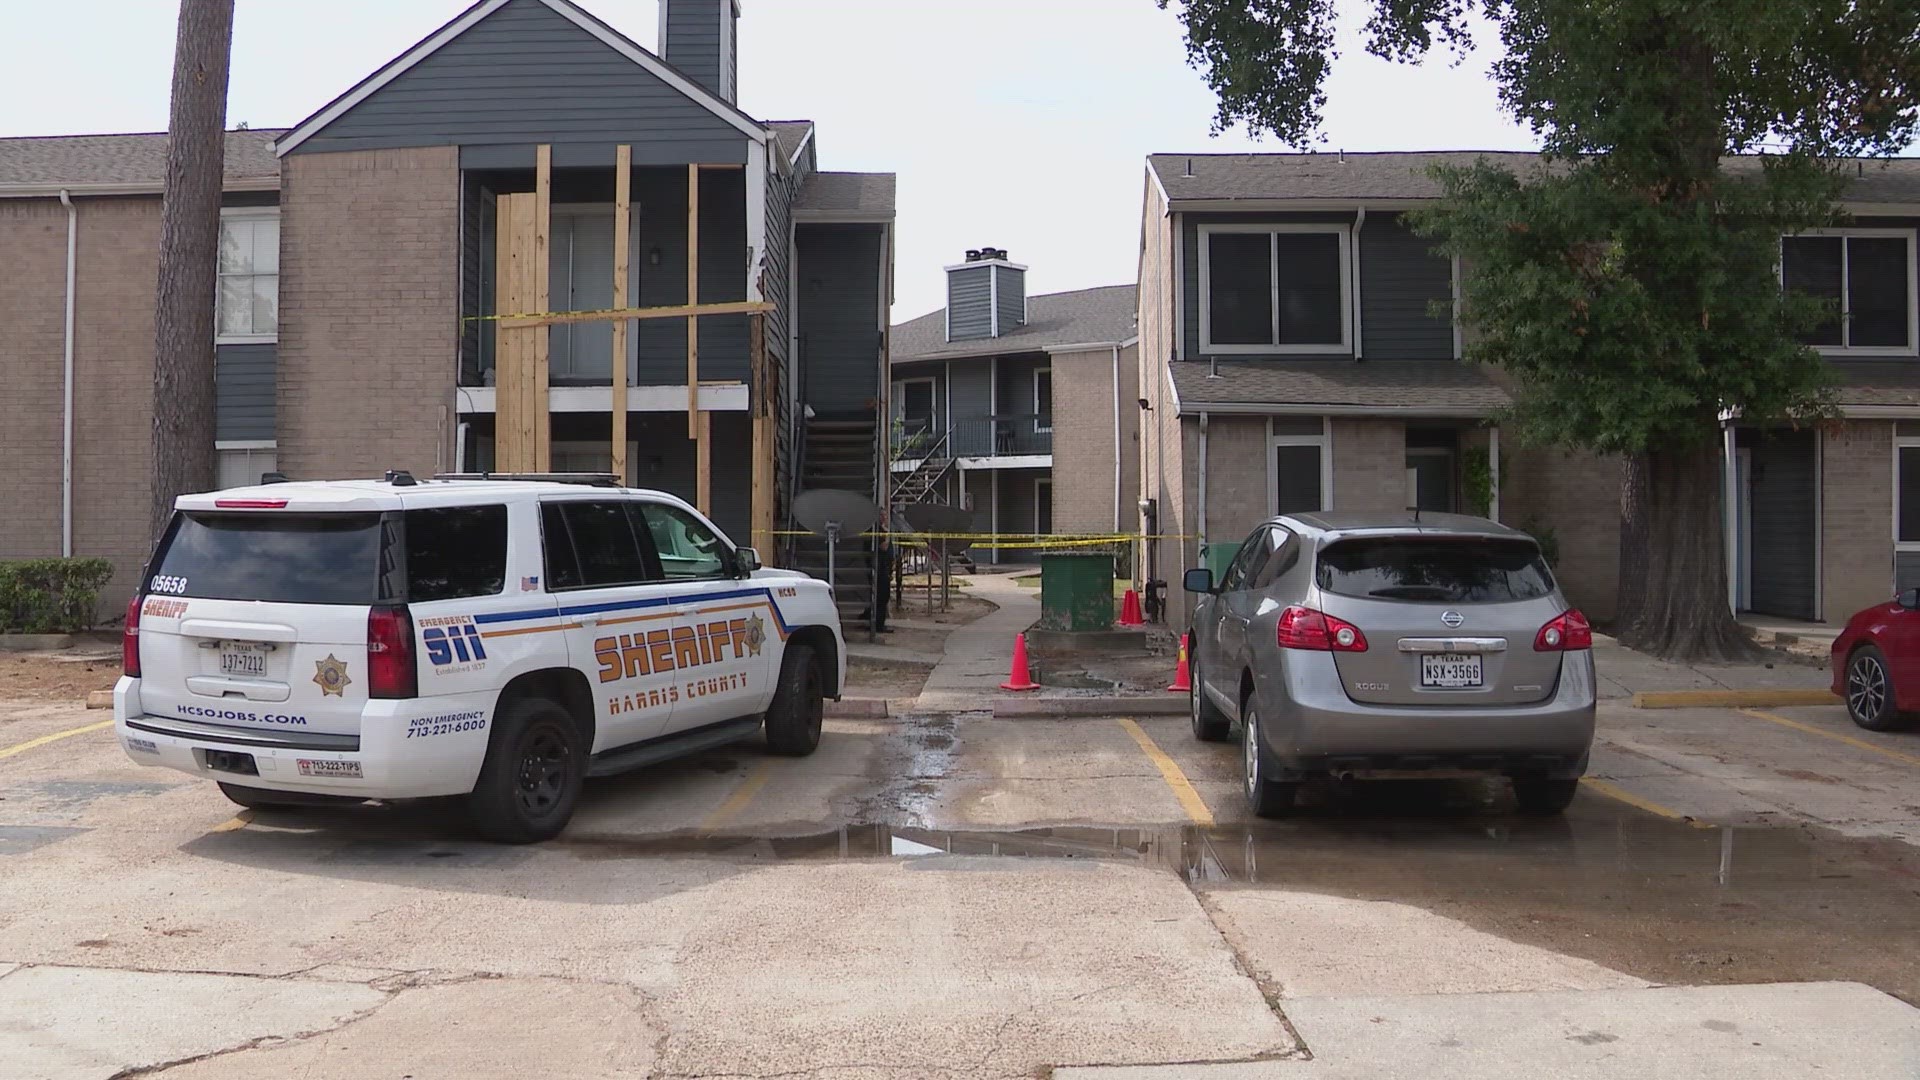 A detective with the Harris County Sheriff's Office confirmed to KHOU 11 that the fetus was found Monday morning.